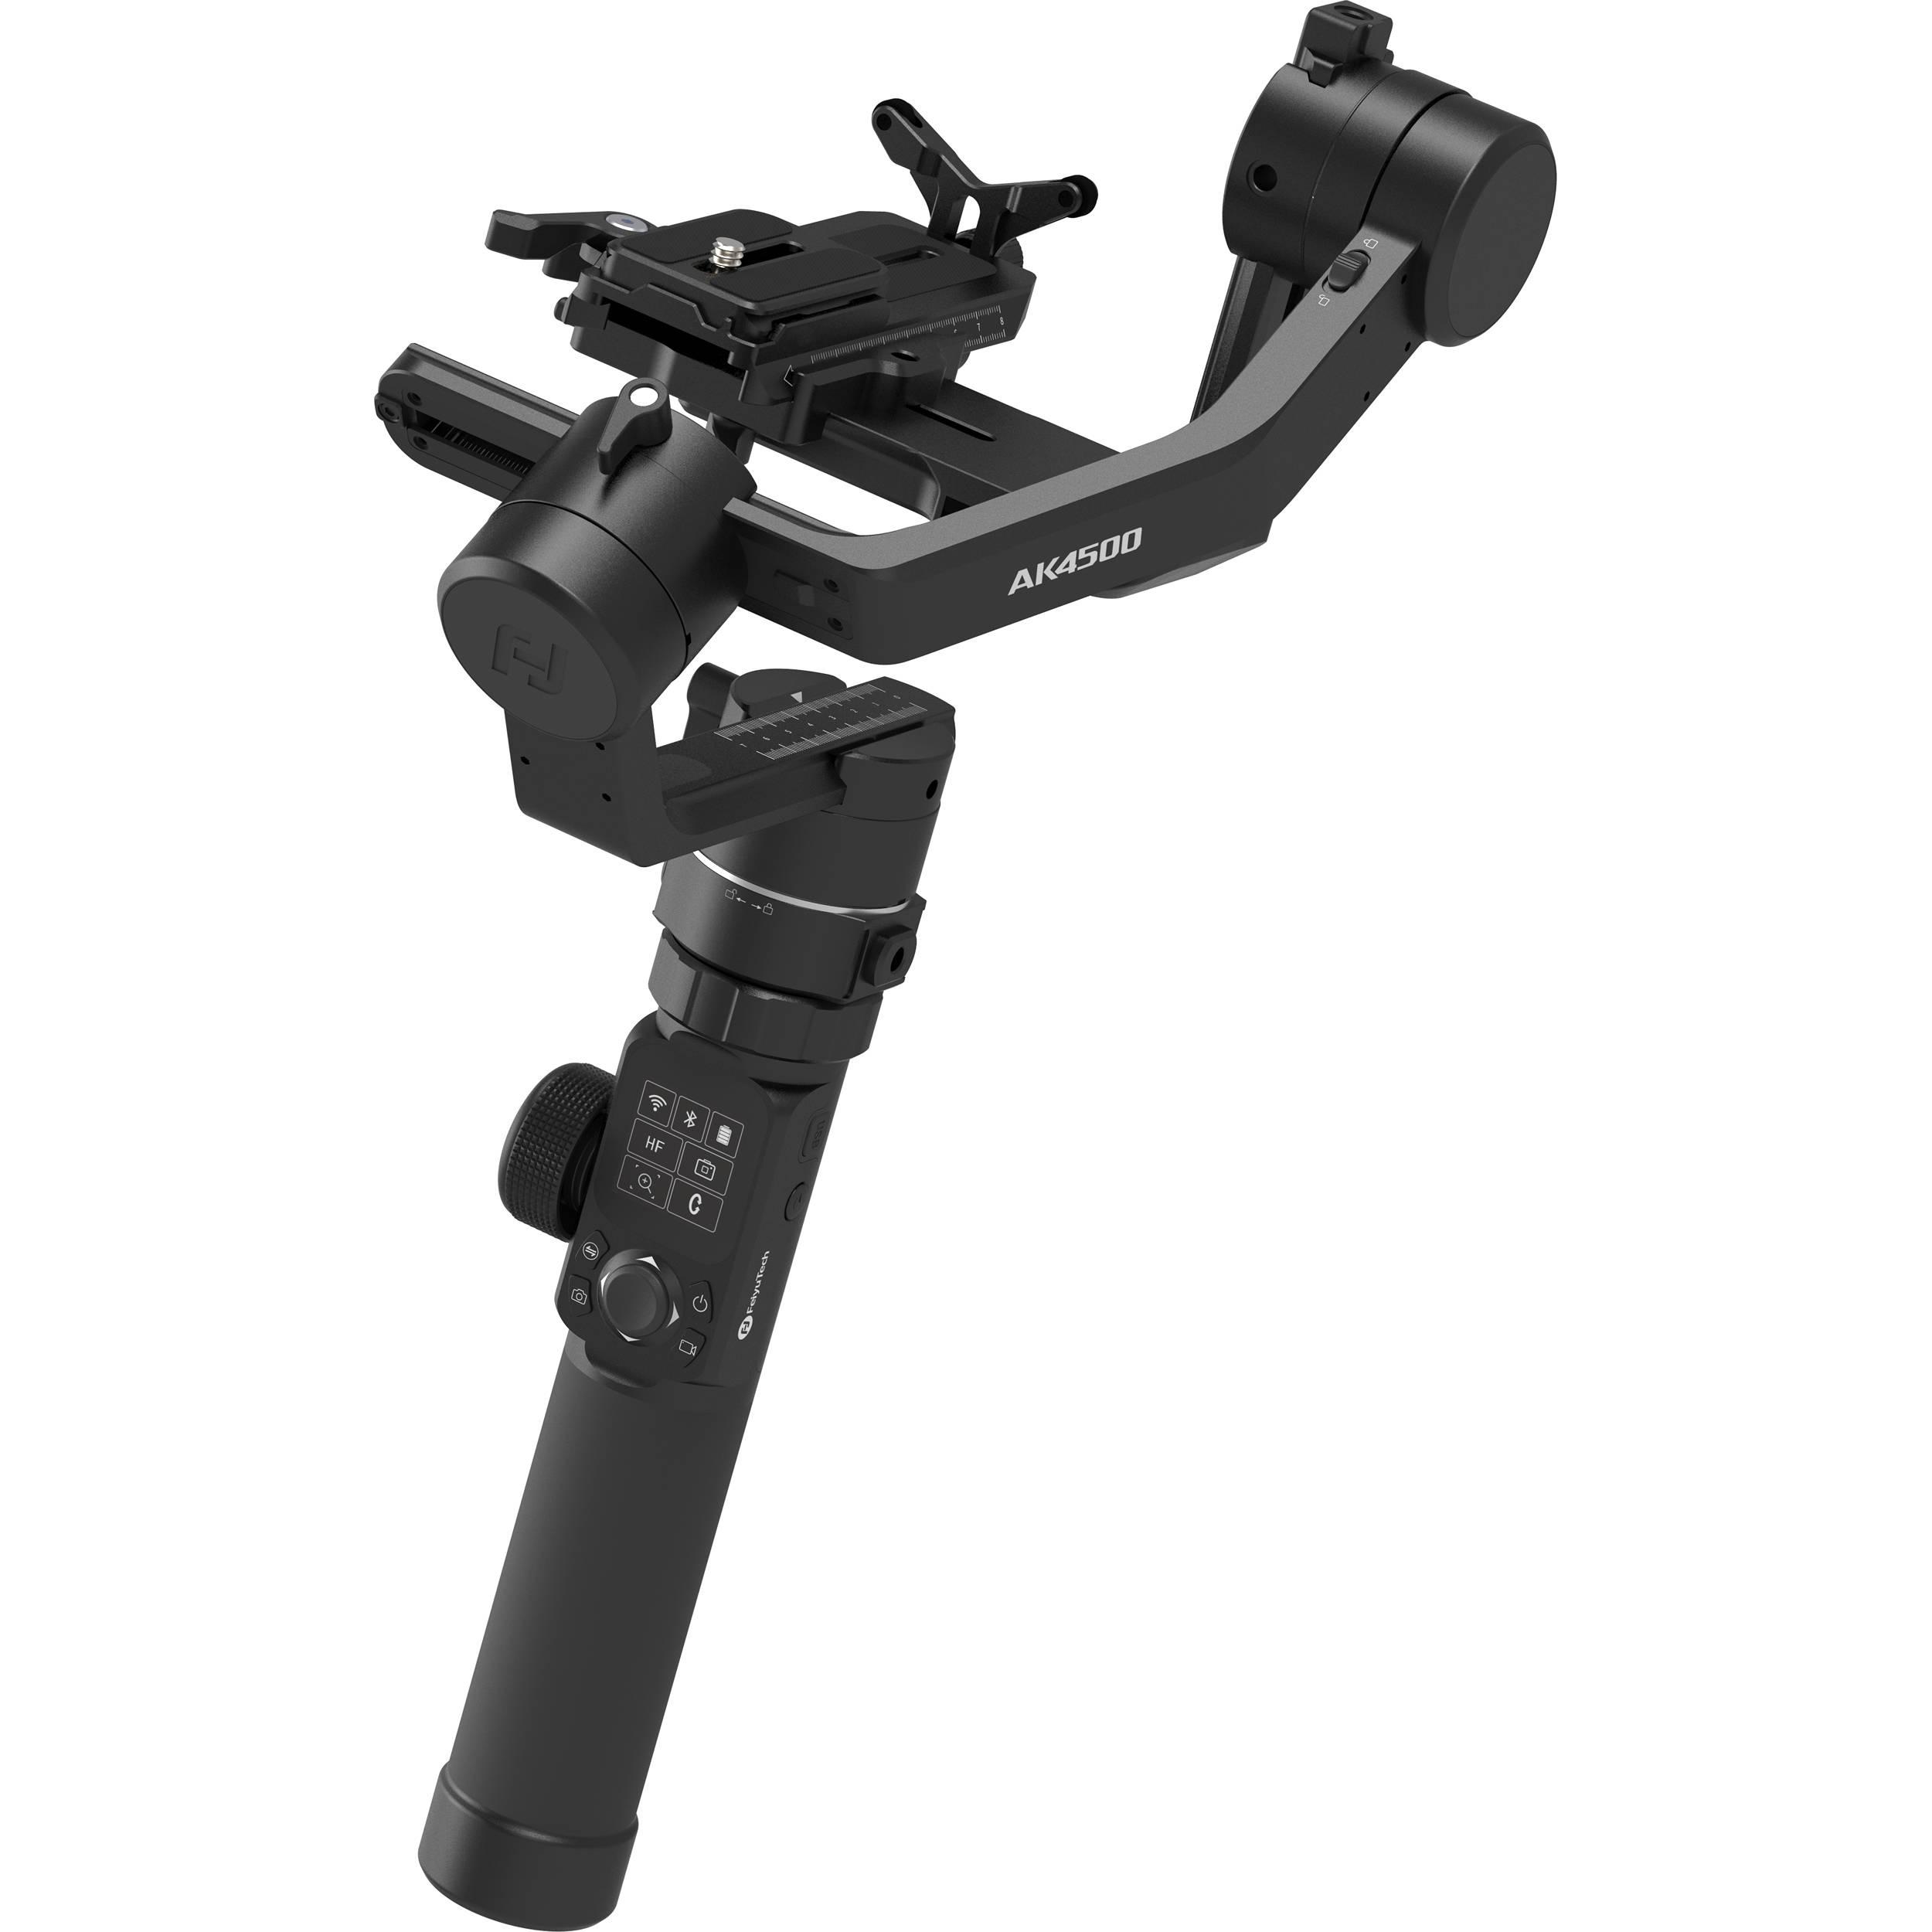 Feiyu AK4500 3-Axis Handheld Gimbal Stabilizer Essentials Kit for $189.99 Shipped